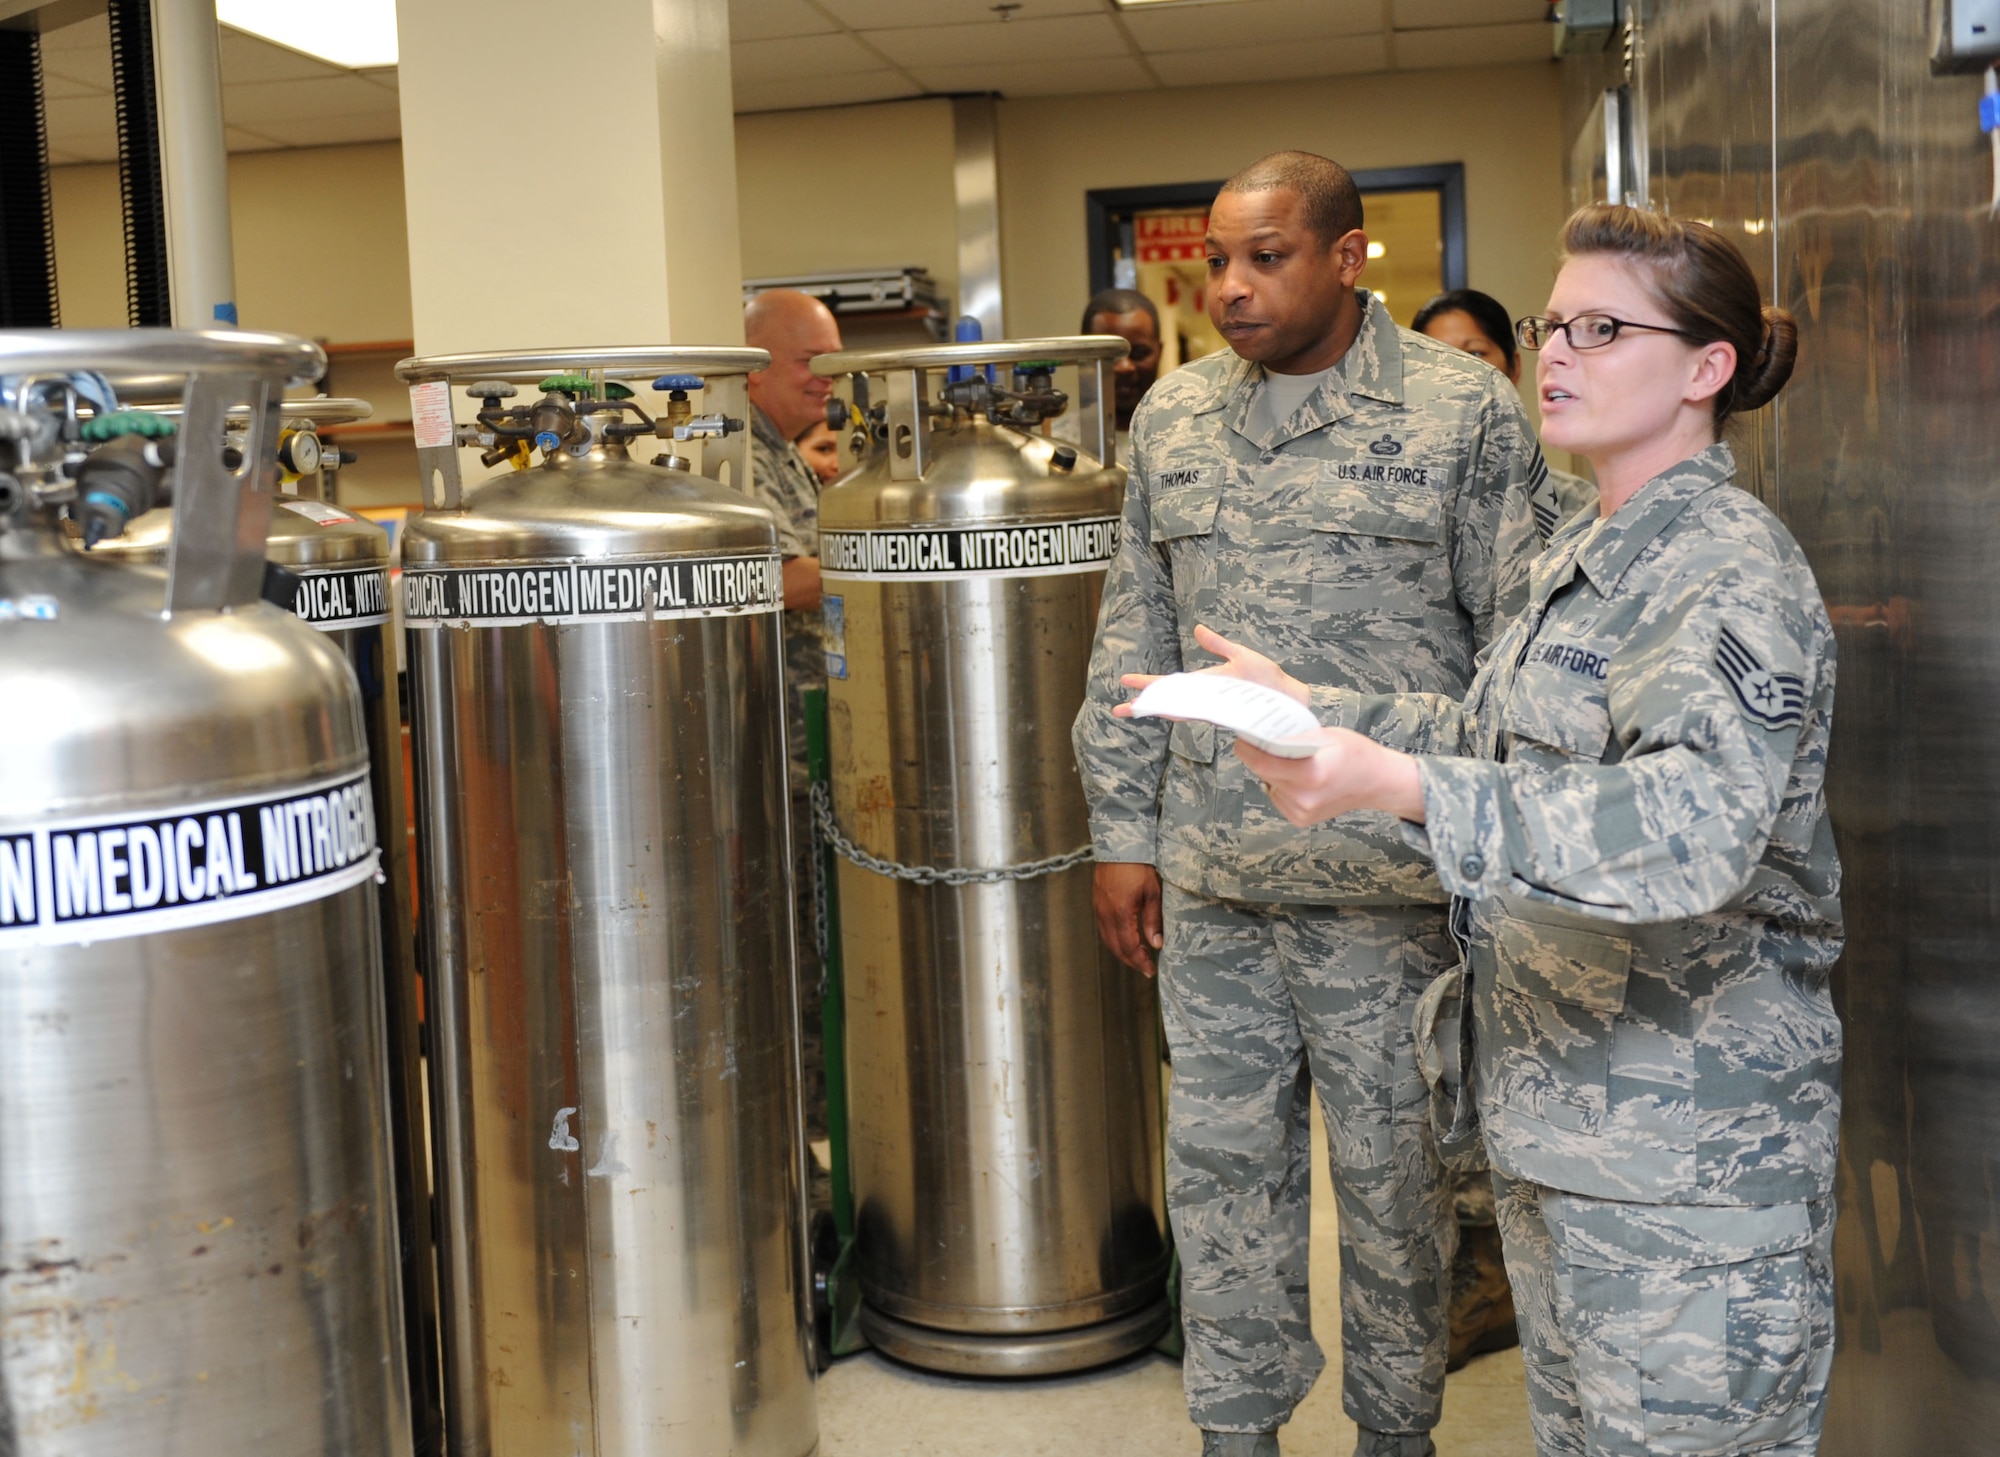 Chief Master Sgt. Farrell Thomas, 2nd Air Force command chief, receives a tour of the clinical research lab from Staff Sgt. Mandy Polen, 81st Medical Support Squadron clinical research laboratory NCO in charge, during an immersion tour Mar.8, 2016, Keesler Air Force Base, Miss. Thomas visited the 81st Medical Group to become oriented with group missions, operations and personnel. (U.S. Air Force photo by Kemberly Groue)